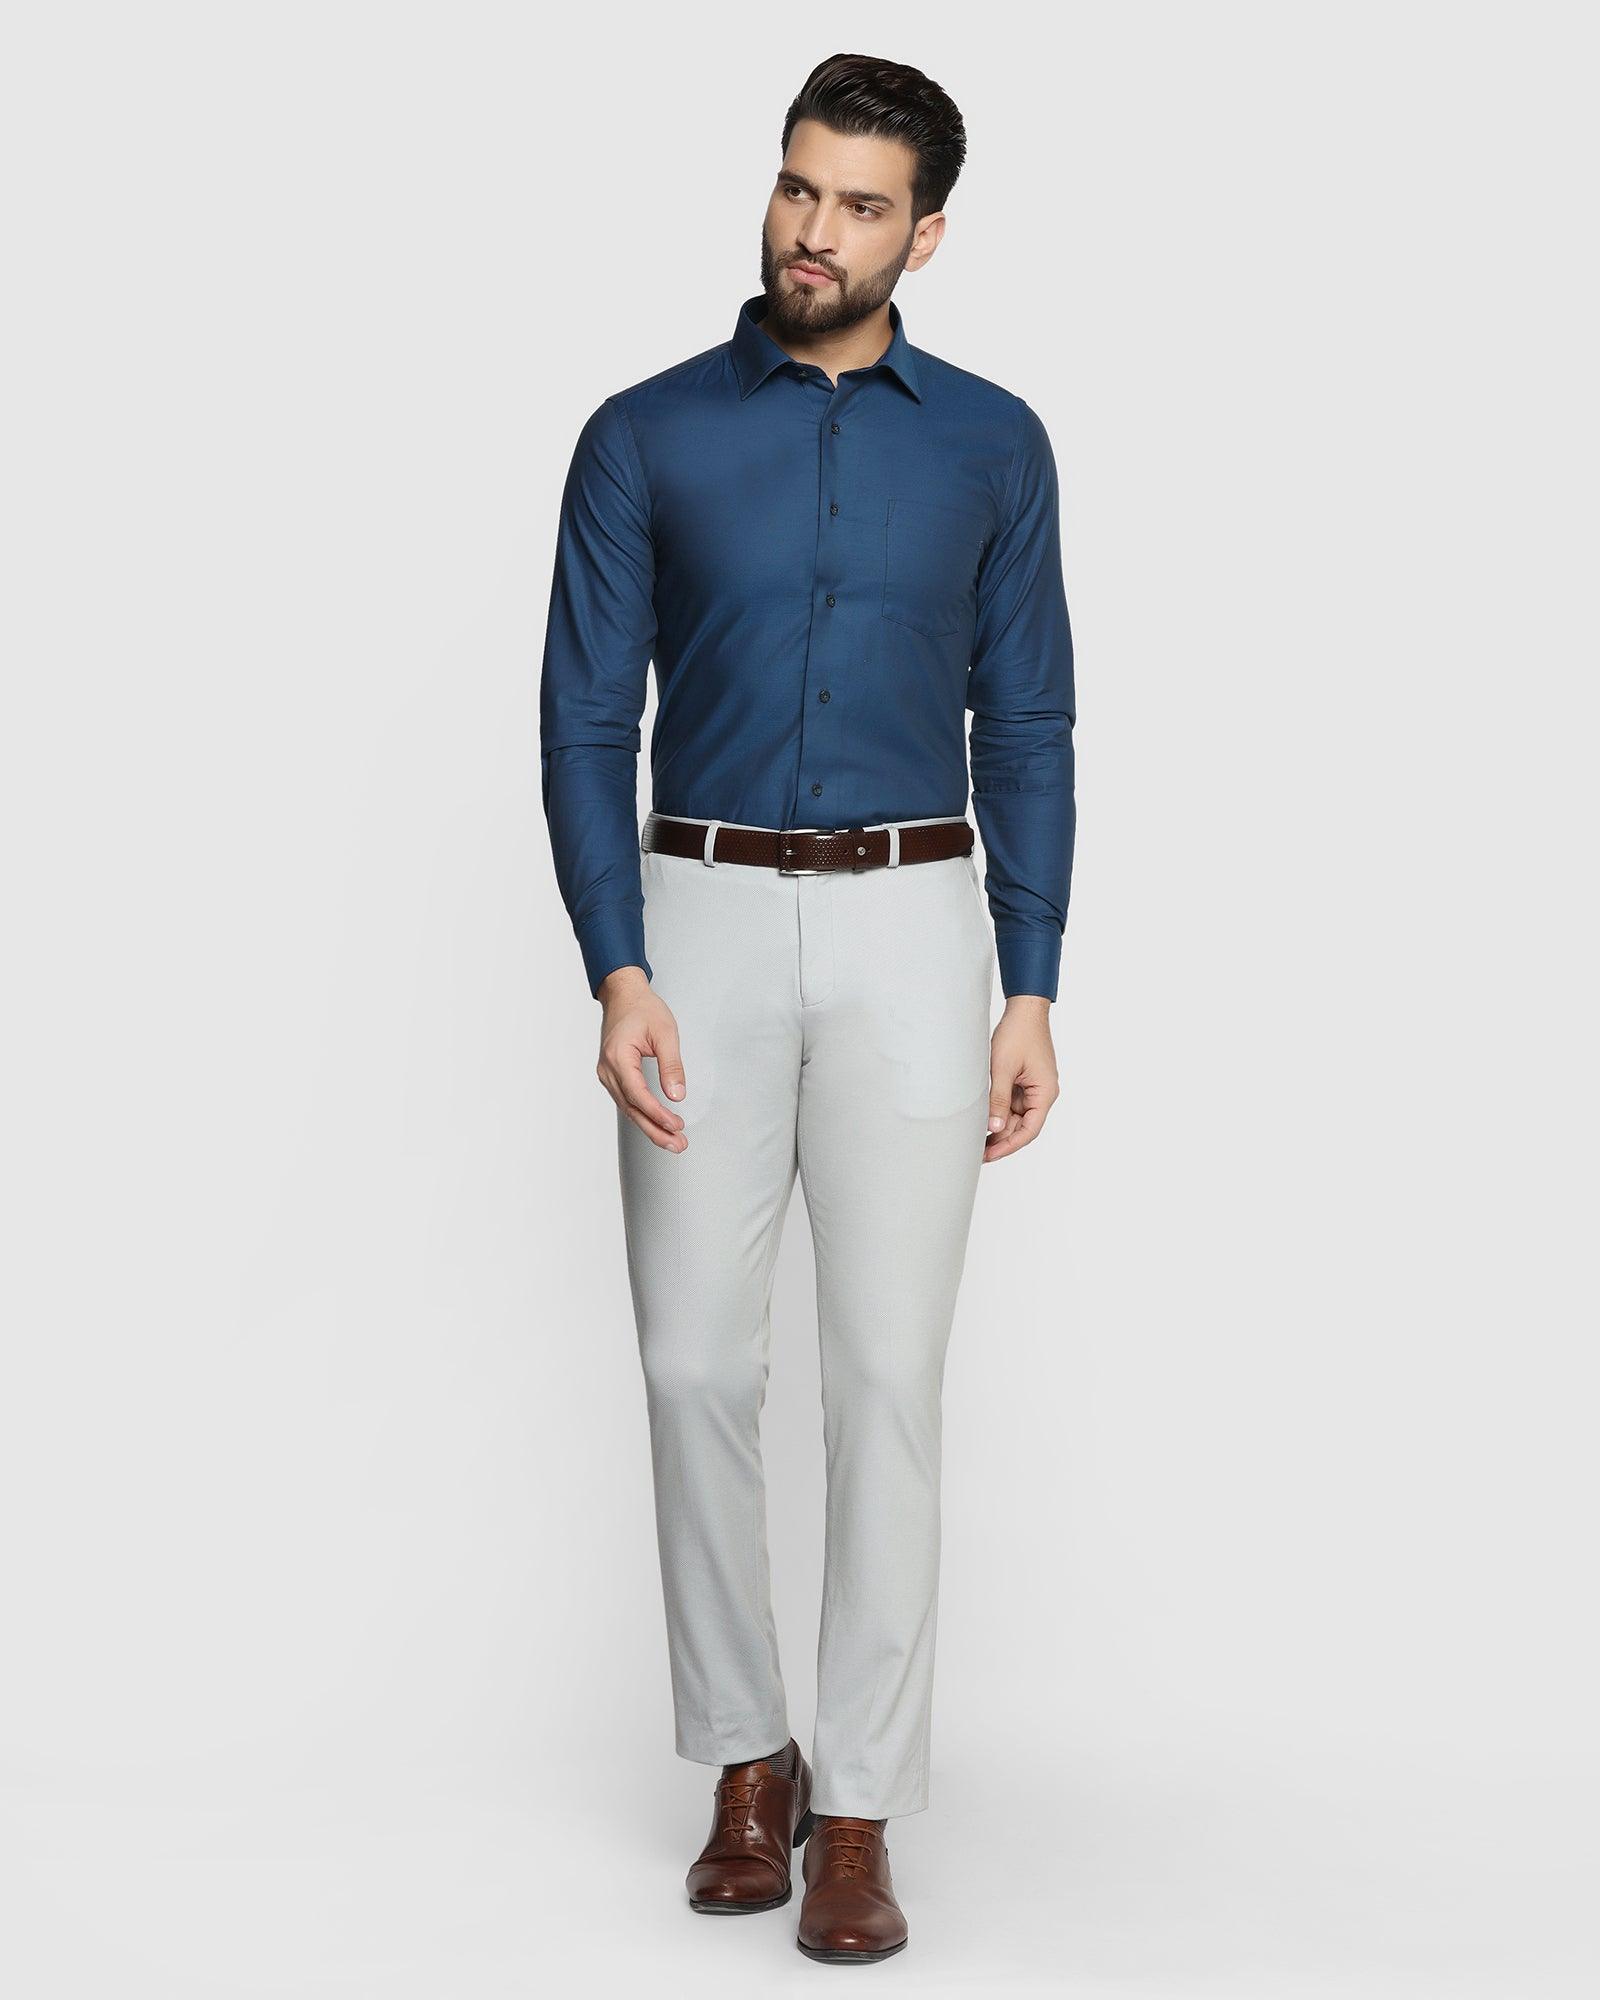 Cobalt Blue Blazer and Trouser With White Tee Outfit for men